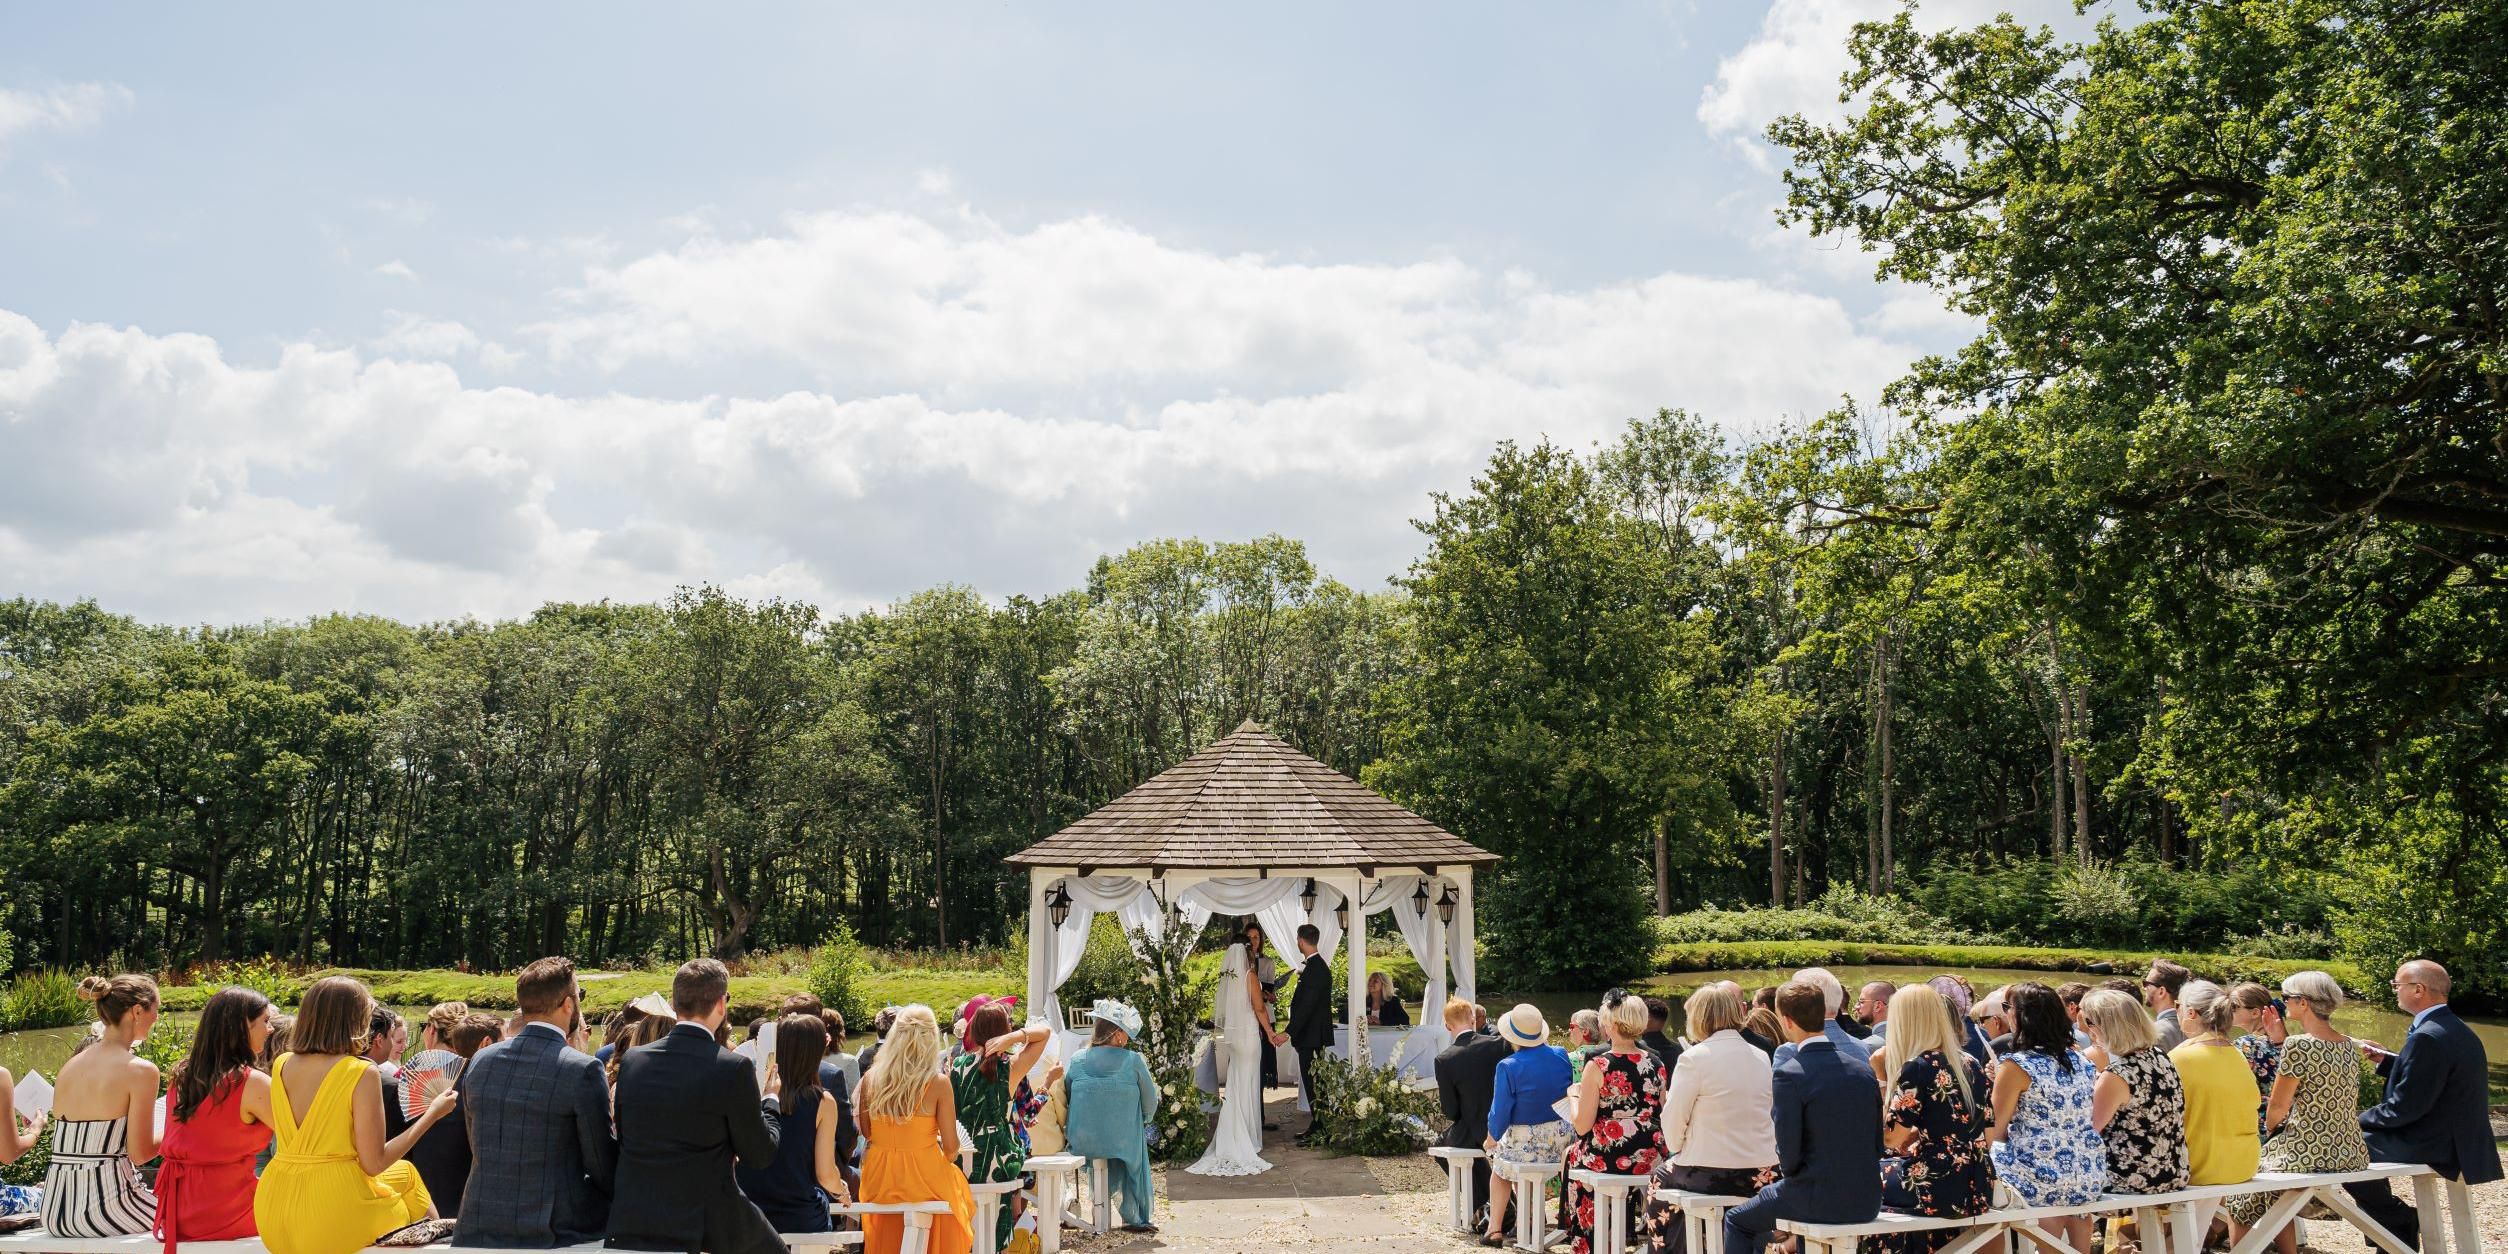 Set in 22 acres of picturesque countryside, voco Lythe Hill’s Gazebo is the most picturesque setting for your outdoor wedding. We recommend considering a singer or musician to perform during your outside ceremony, this really helps to create such a wonderful and natural ambience. 